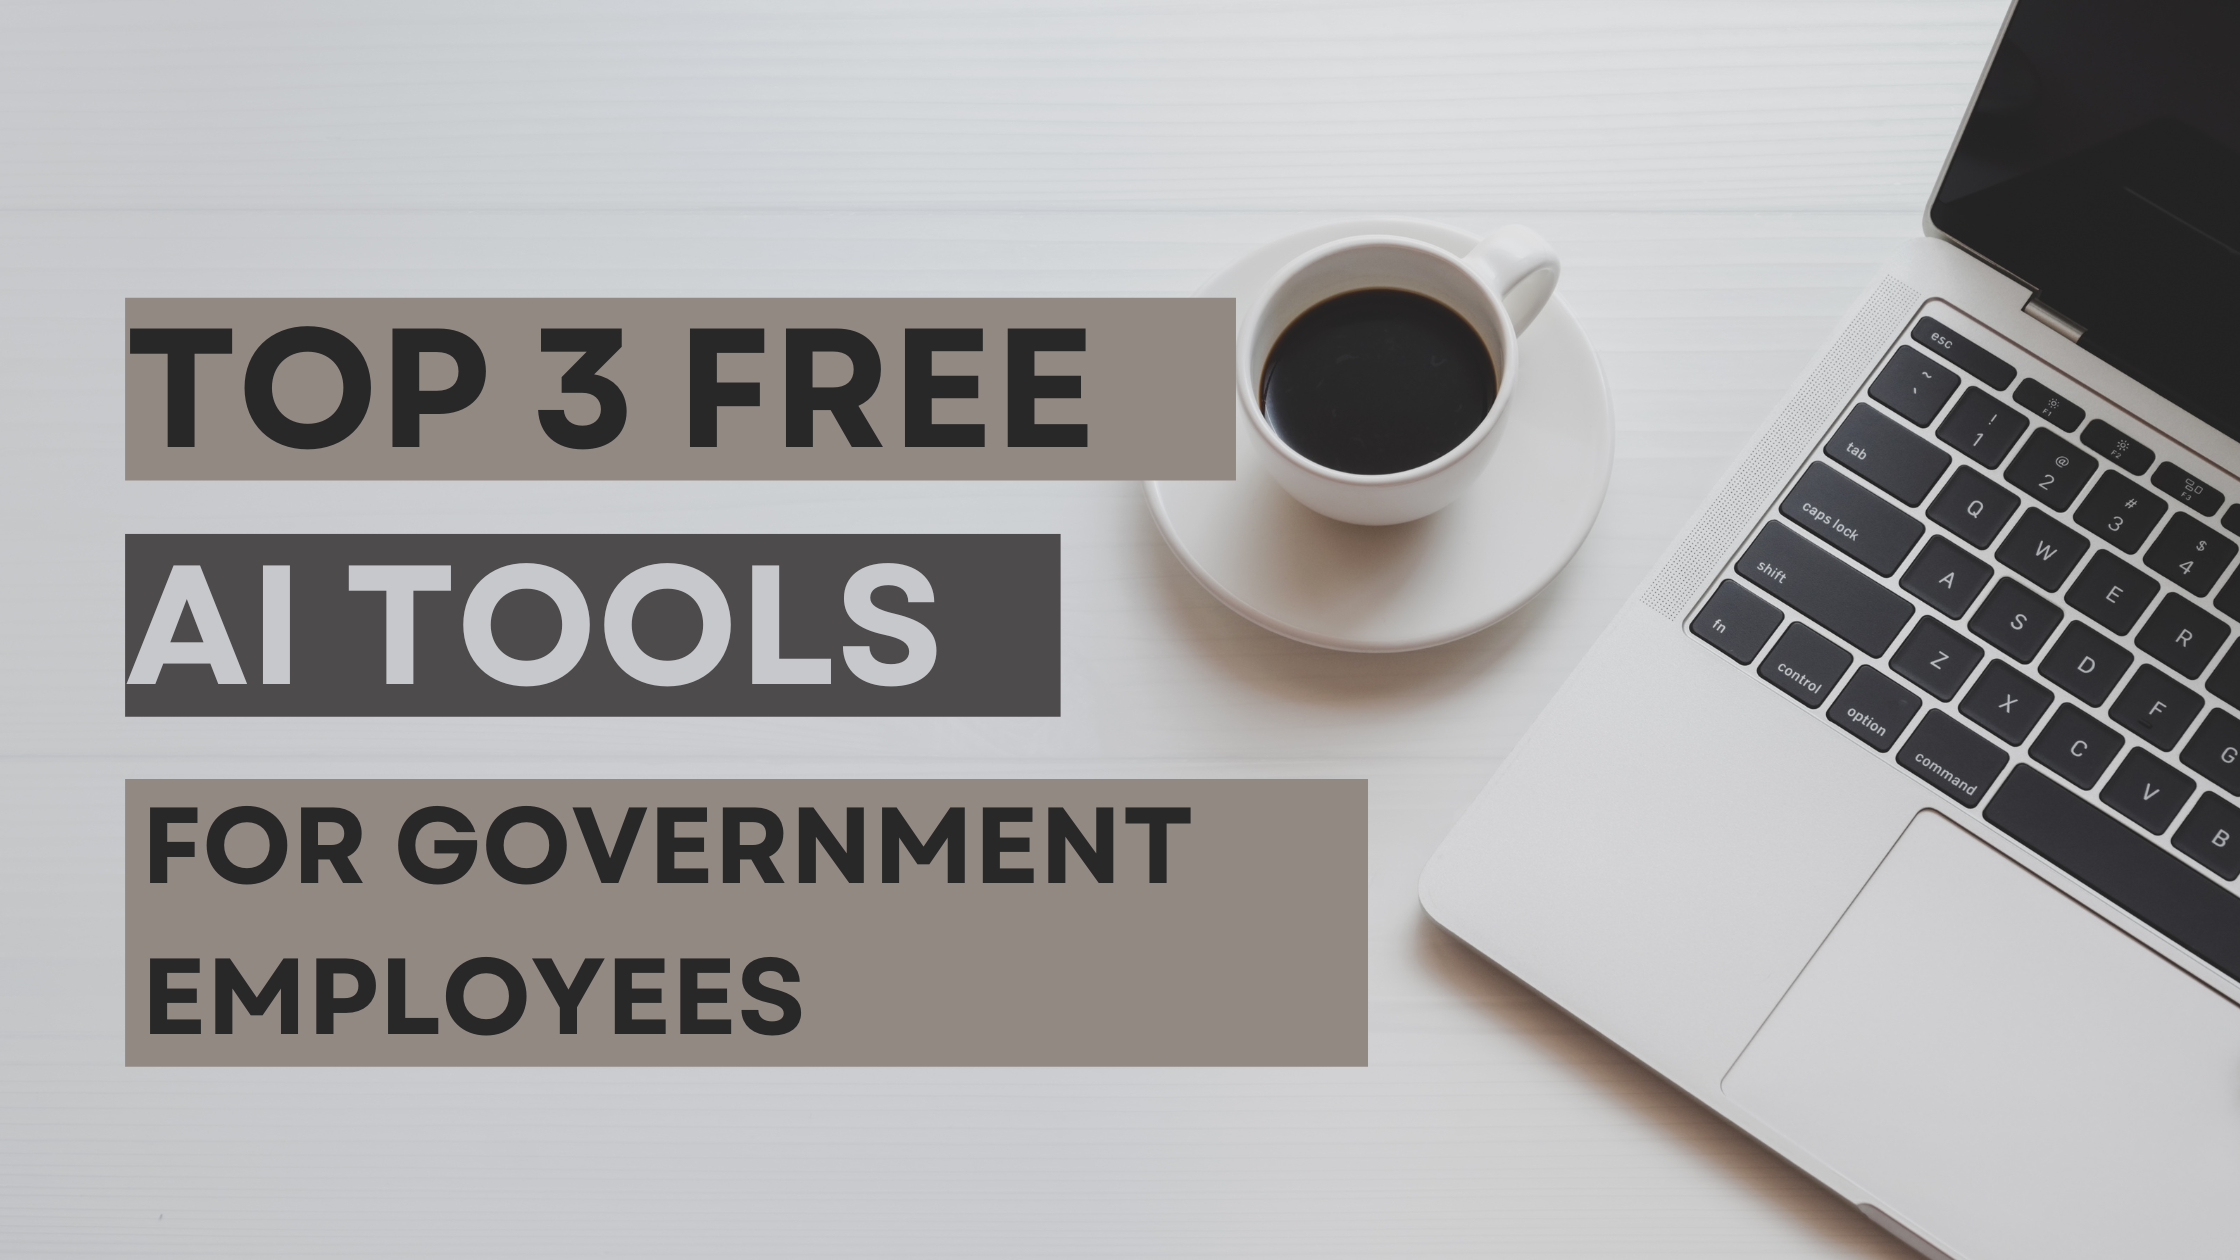 Top 3 FREE AI Tools for Government Employees: Empowering Public Service